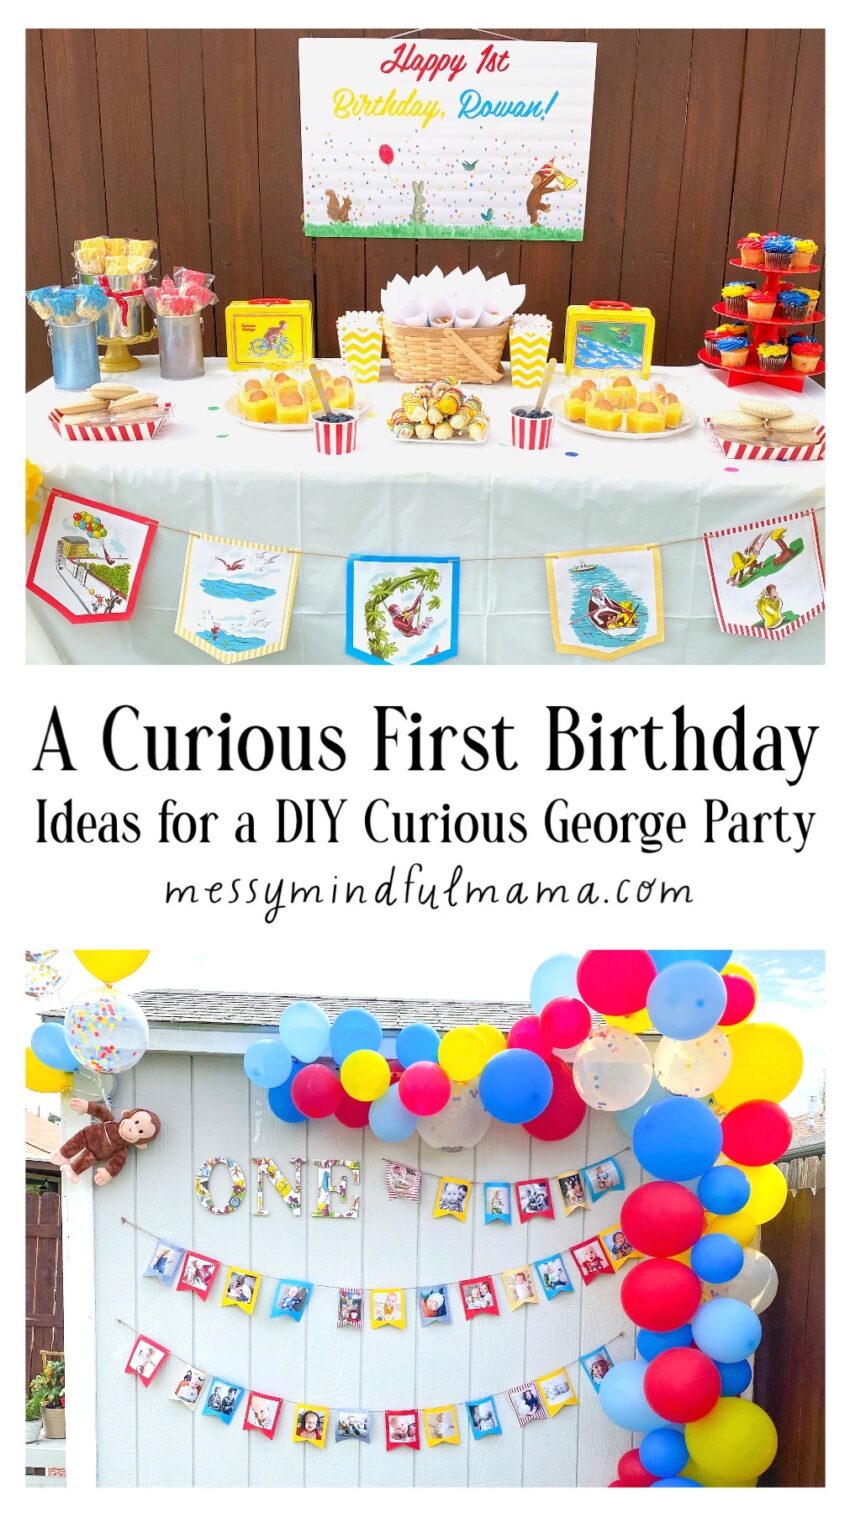 DIY Messy Paint Birthday Party